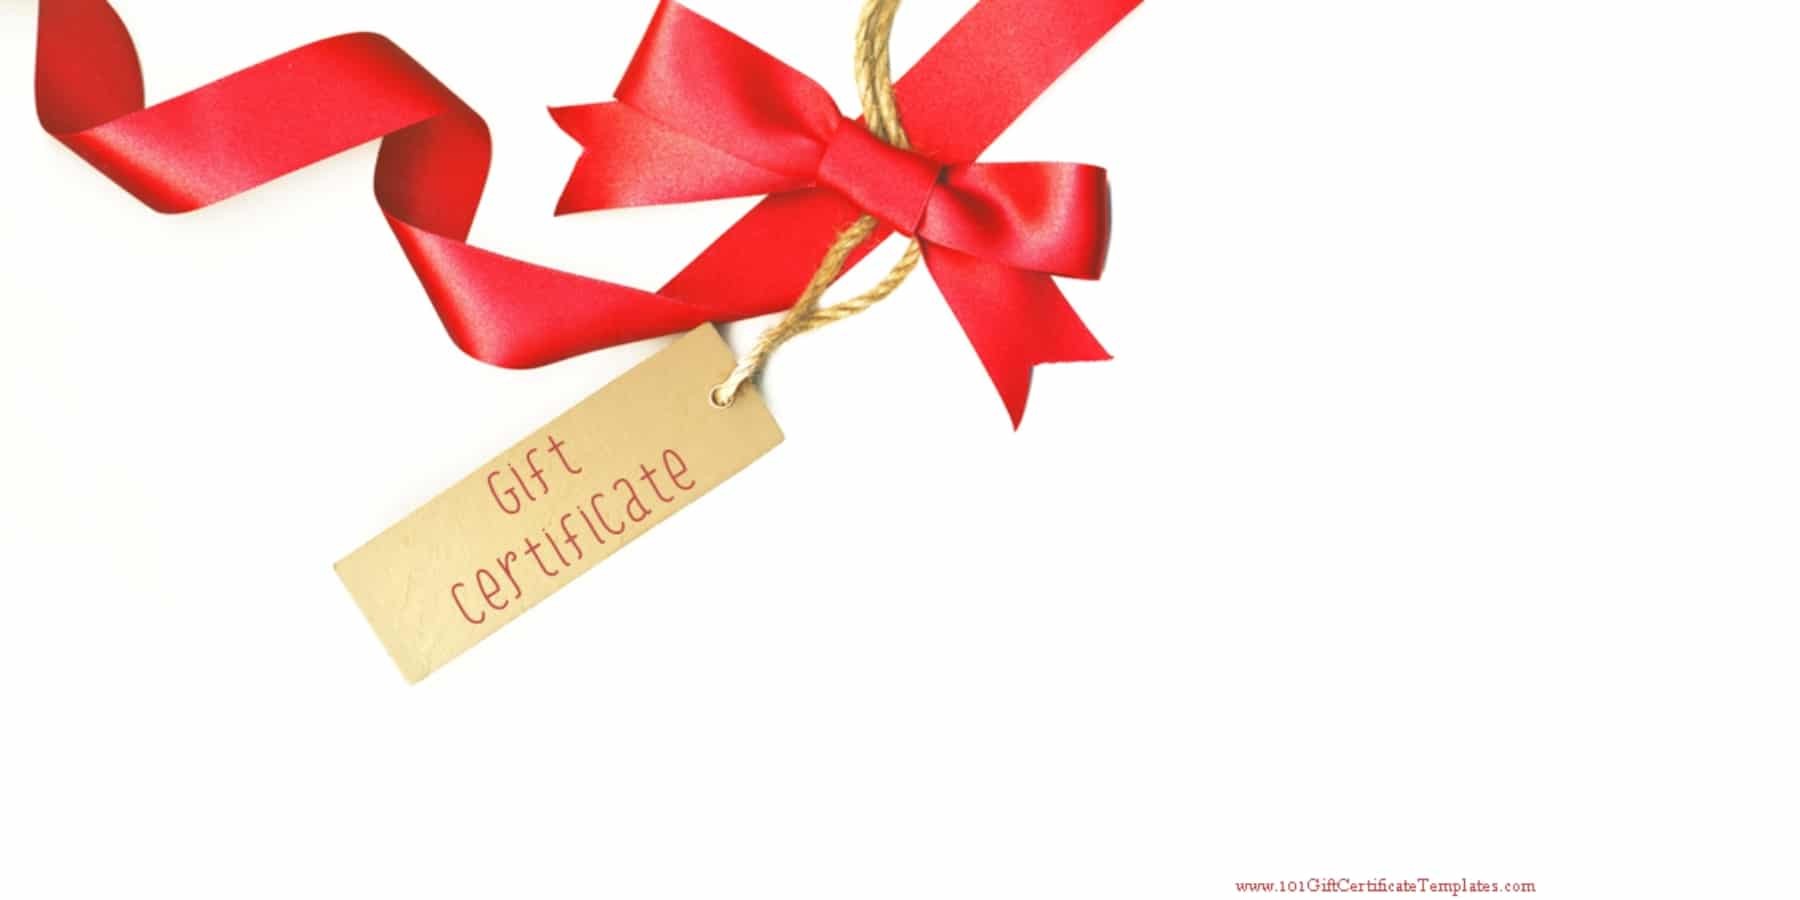 Printable Gift Certificate Templates Card Samples Free